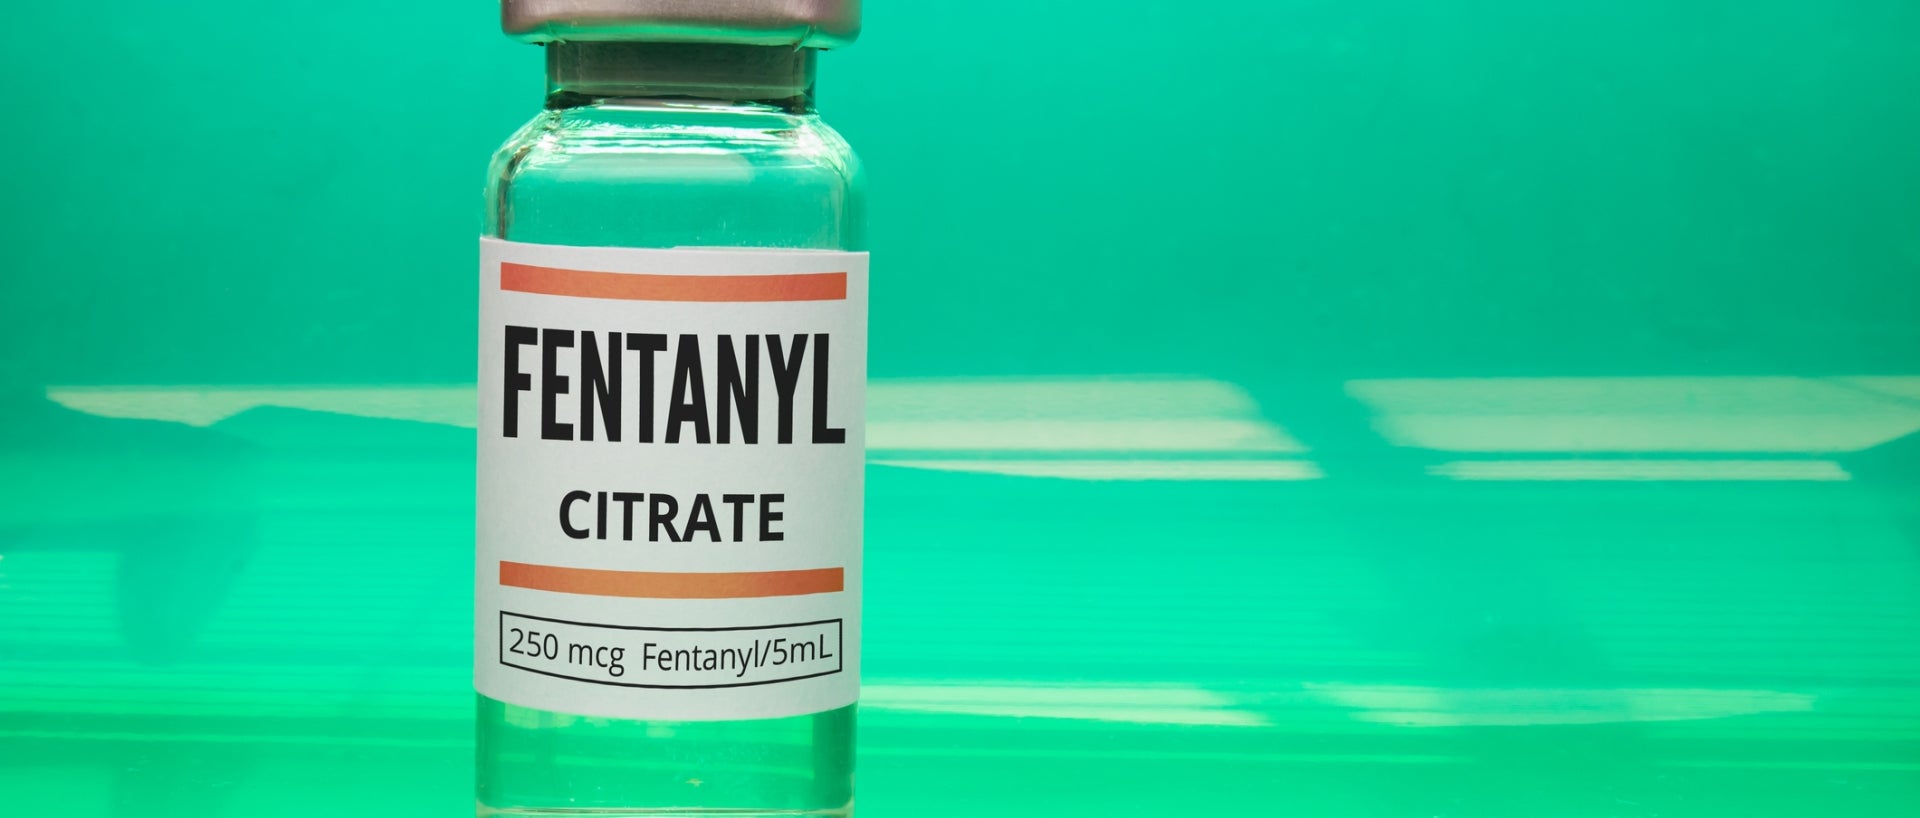 Fentanyl vial on green background